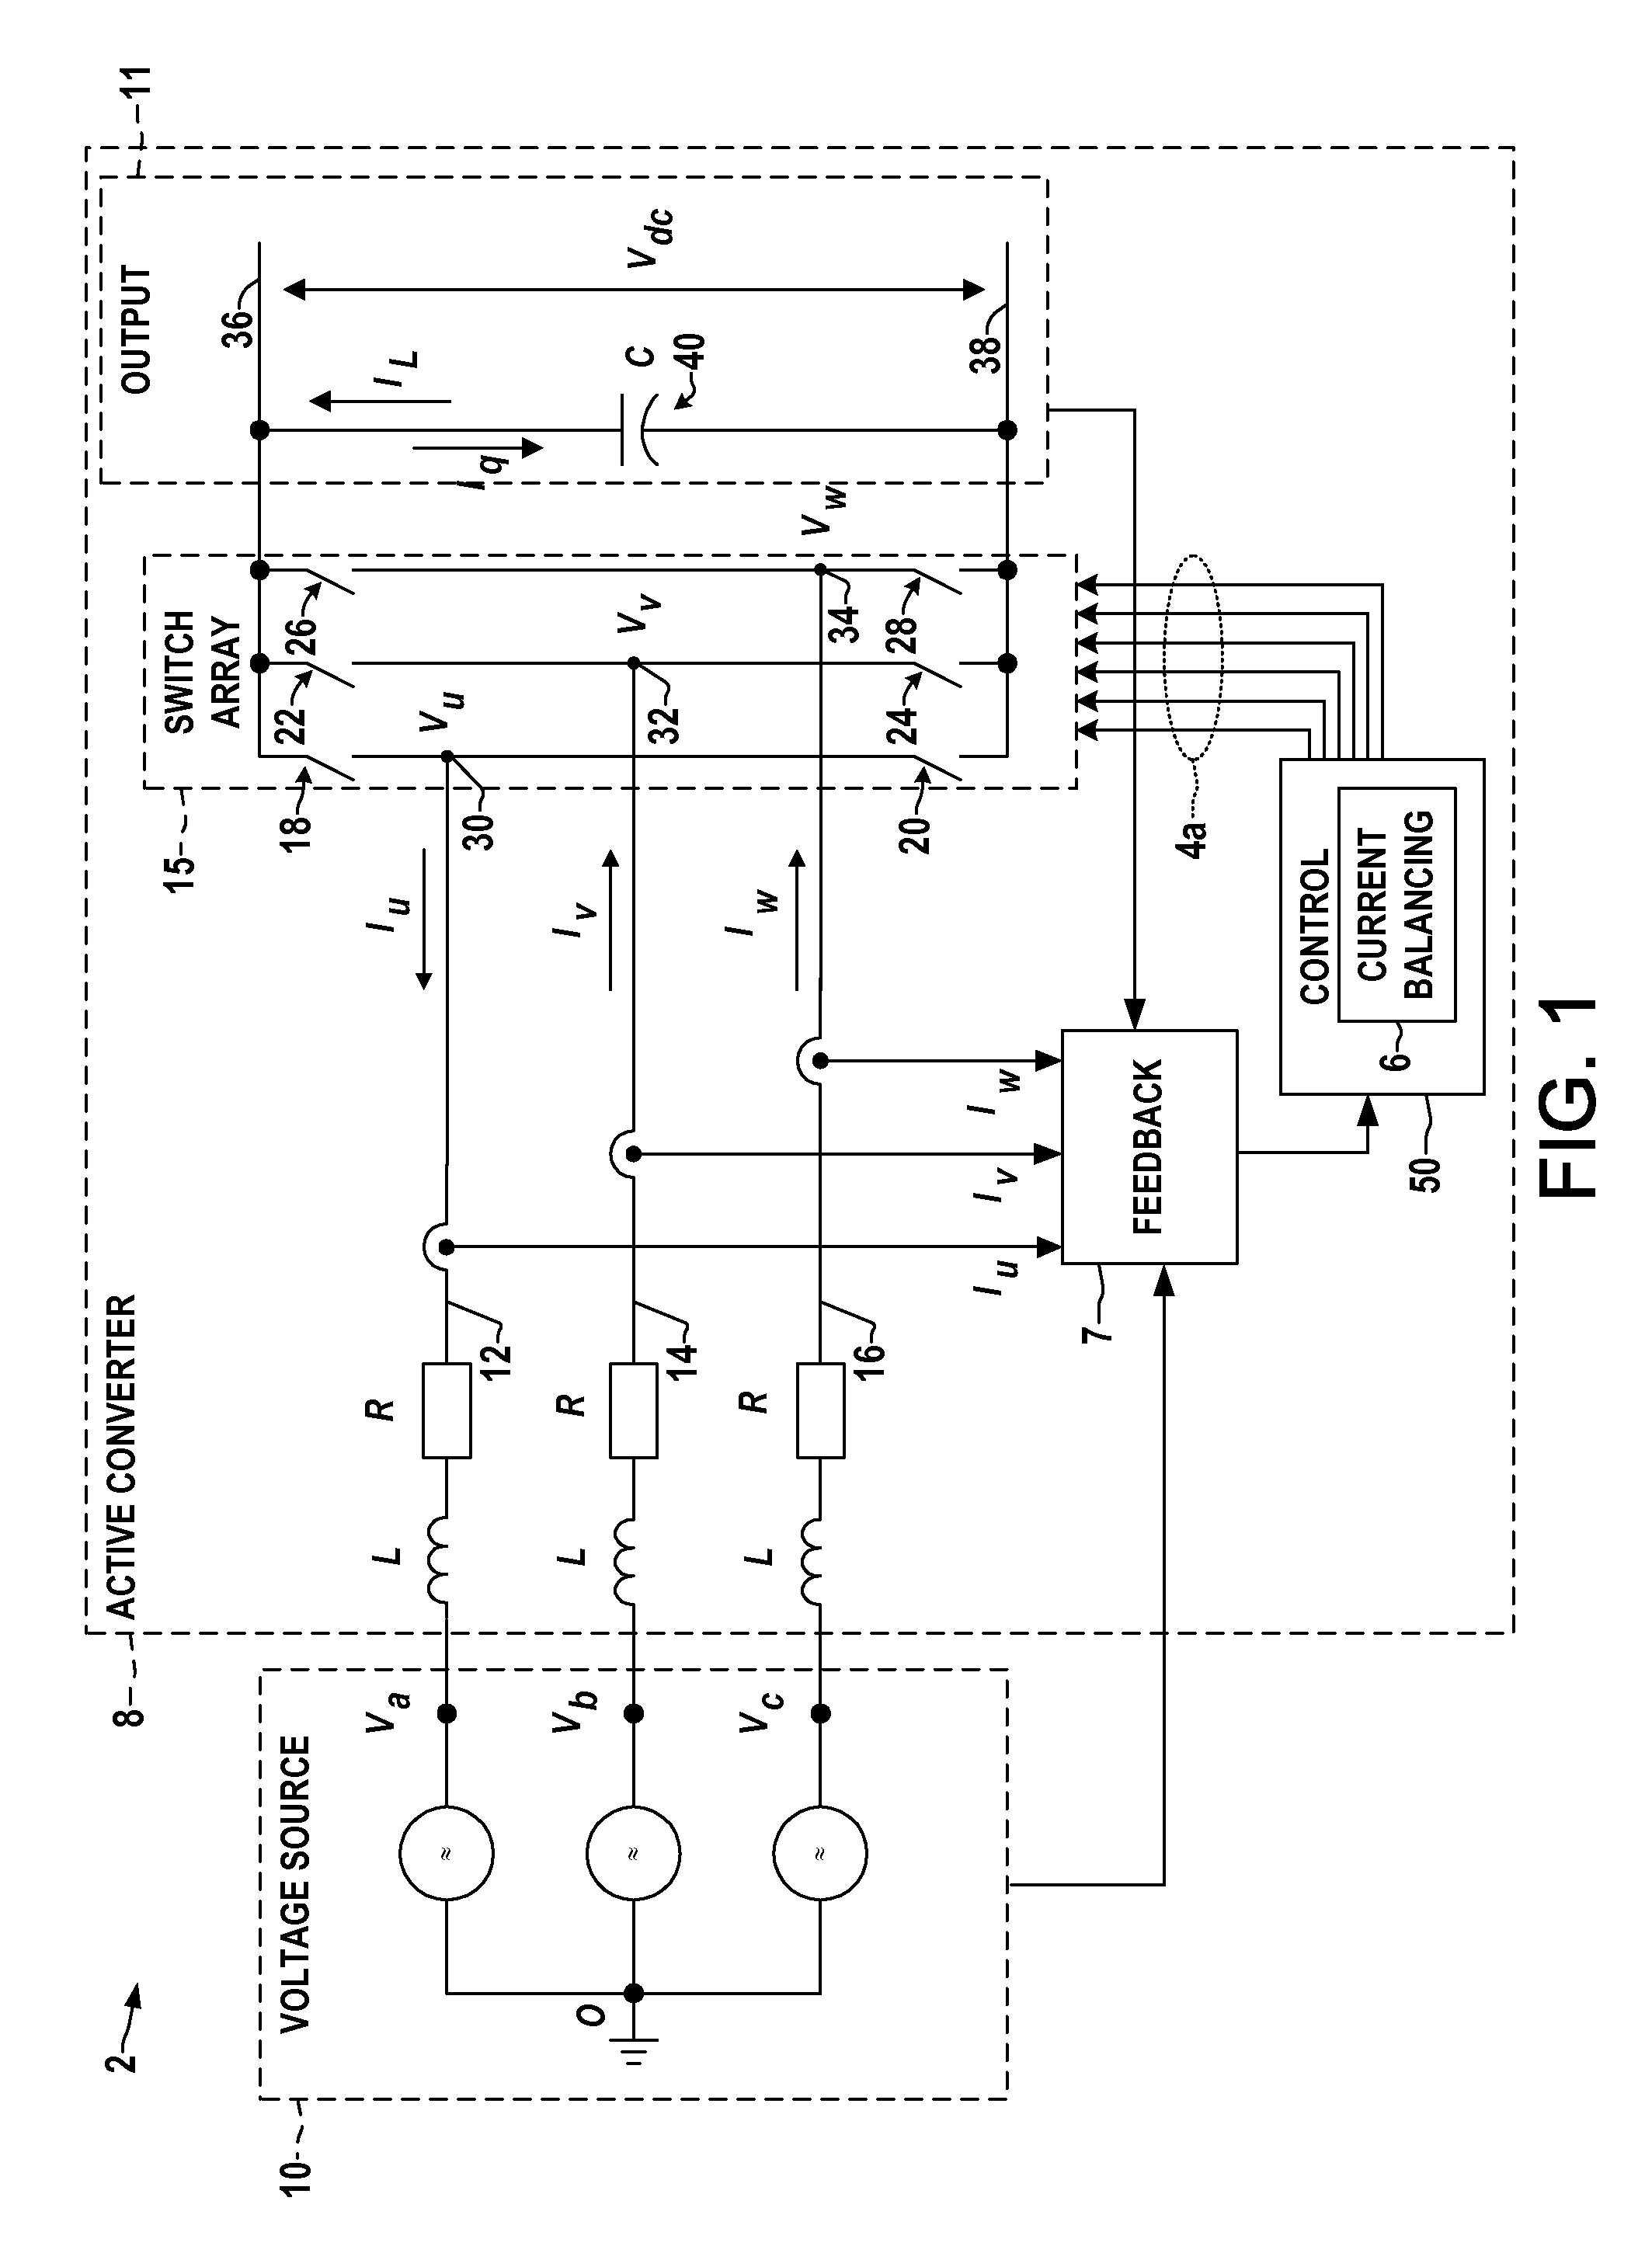 Method and apparatus for phase current balance in active converter with unbalanced AC line voltage source